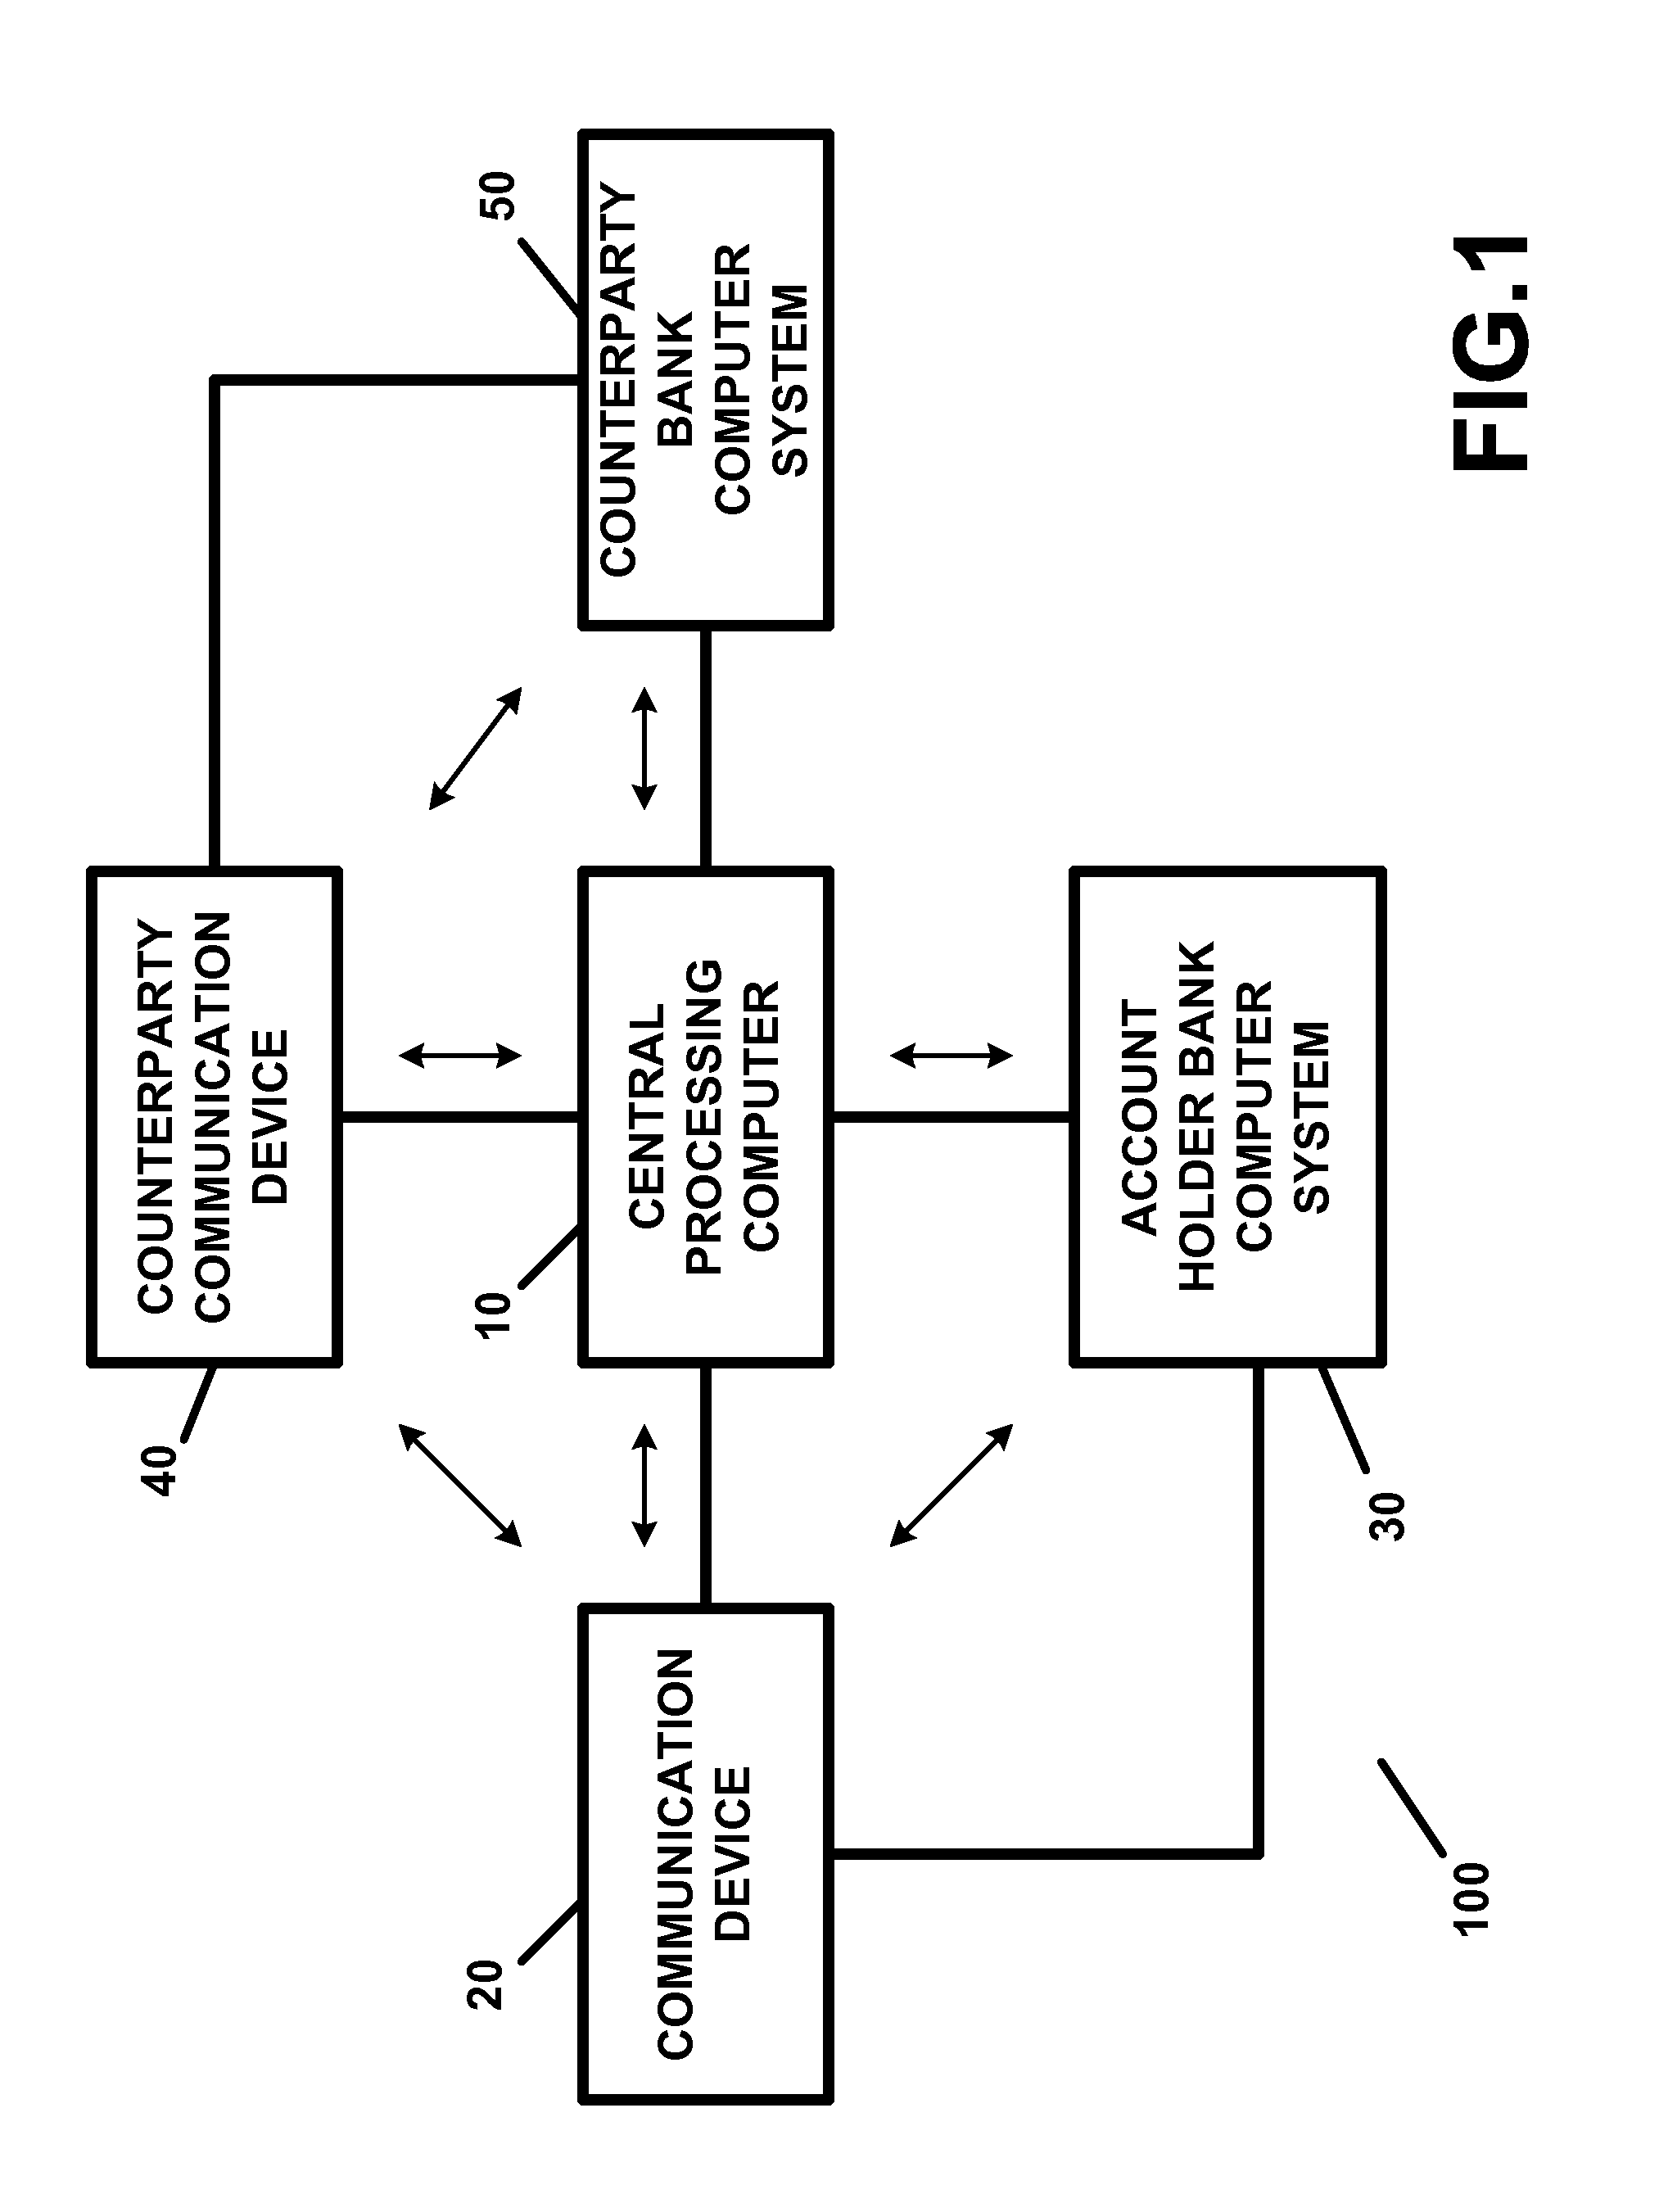 Apparatus and method for providing transaction security and/or account security